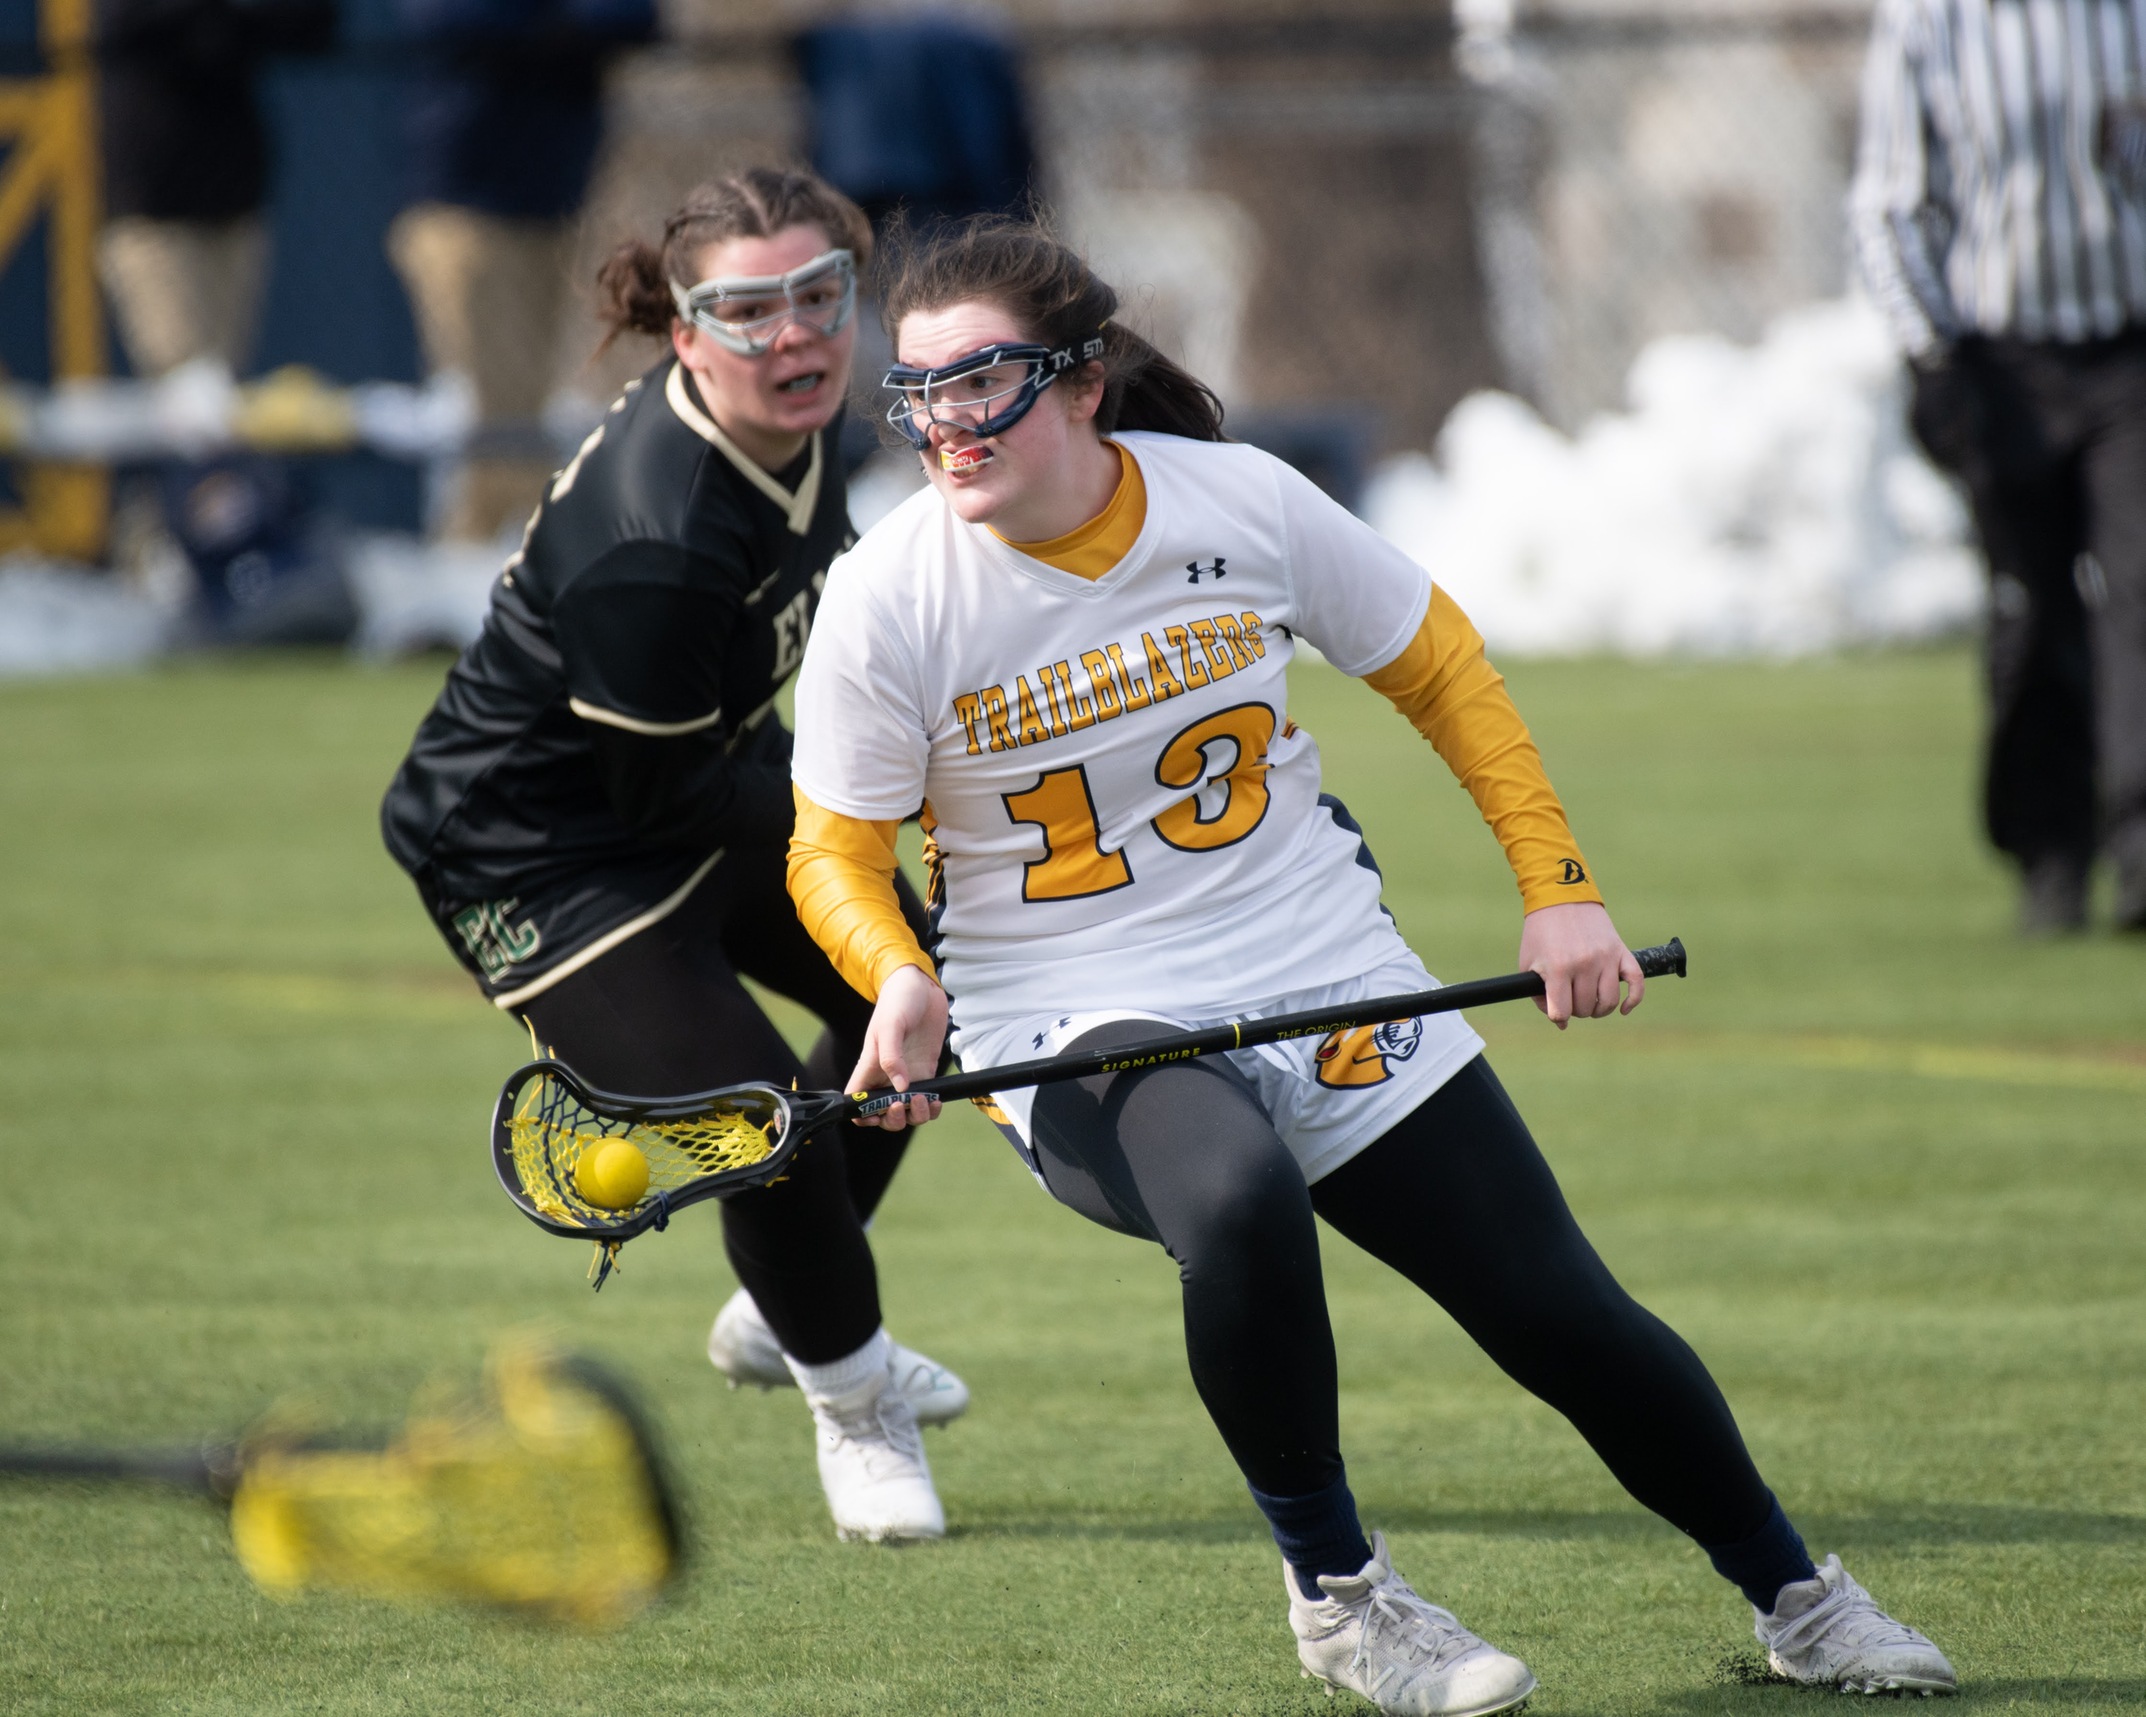 Women's Lacrosse victory over NVU-Lyndon earns Baribault first win at the helm